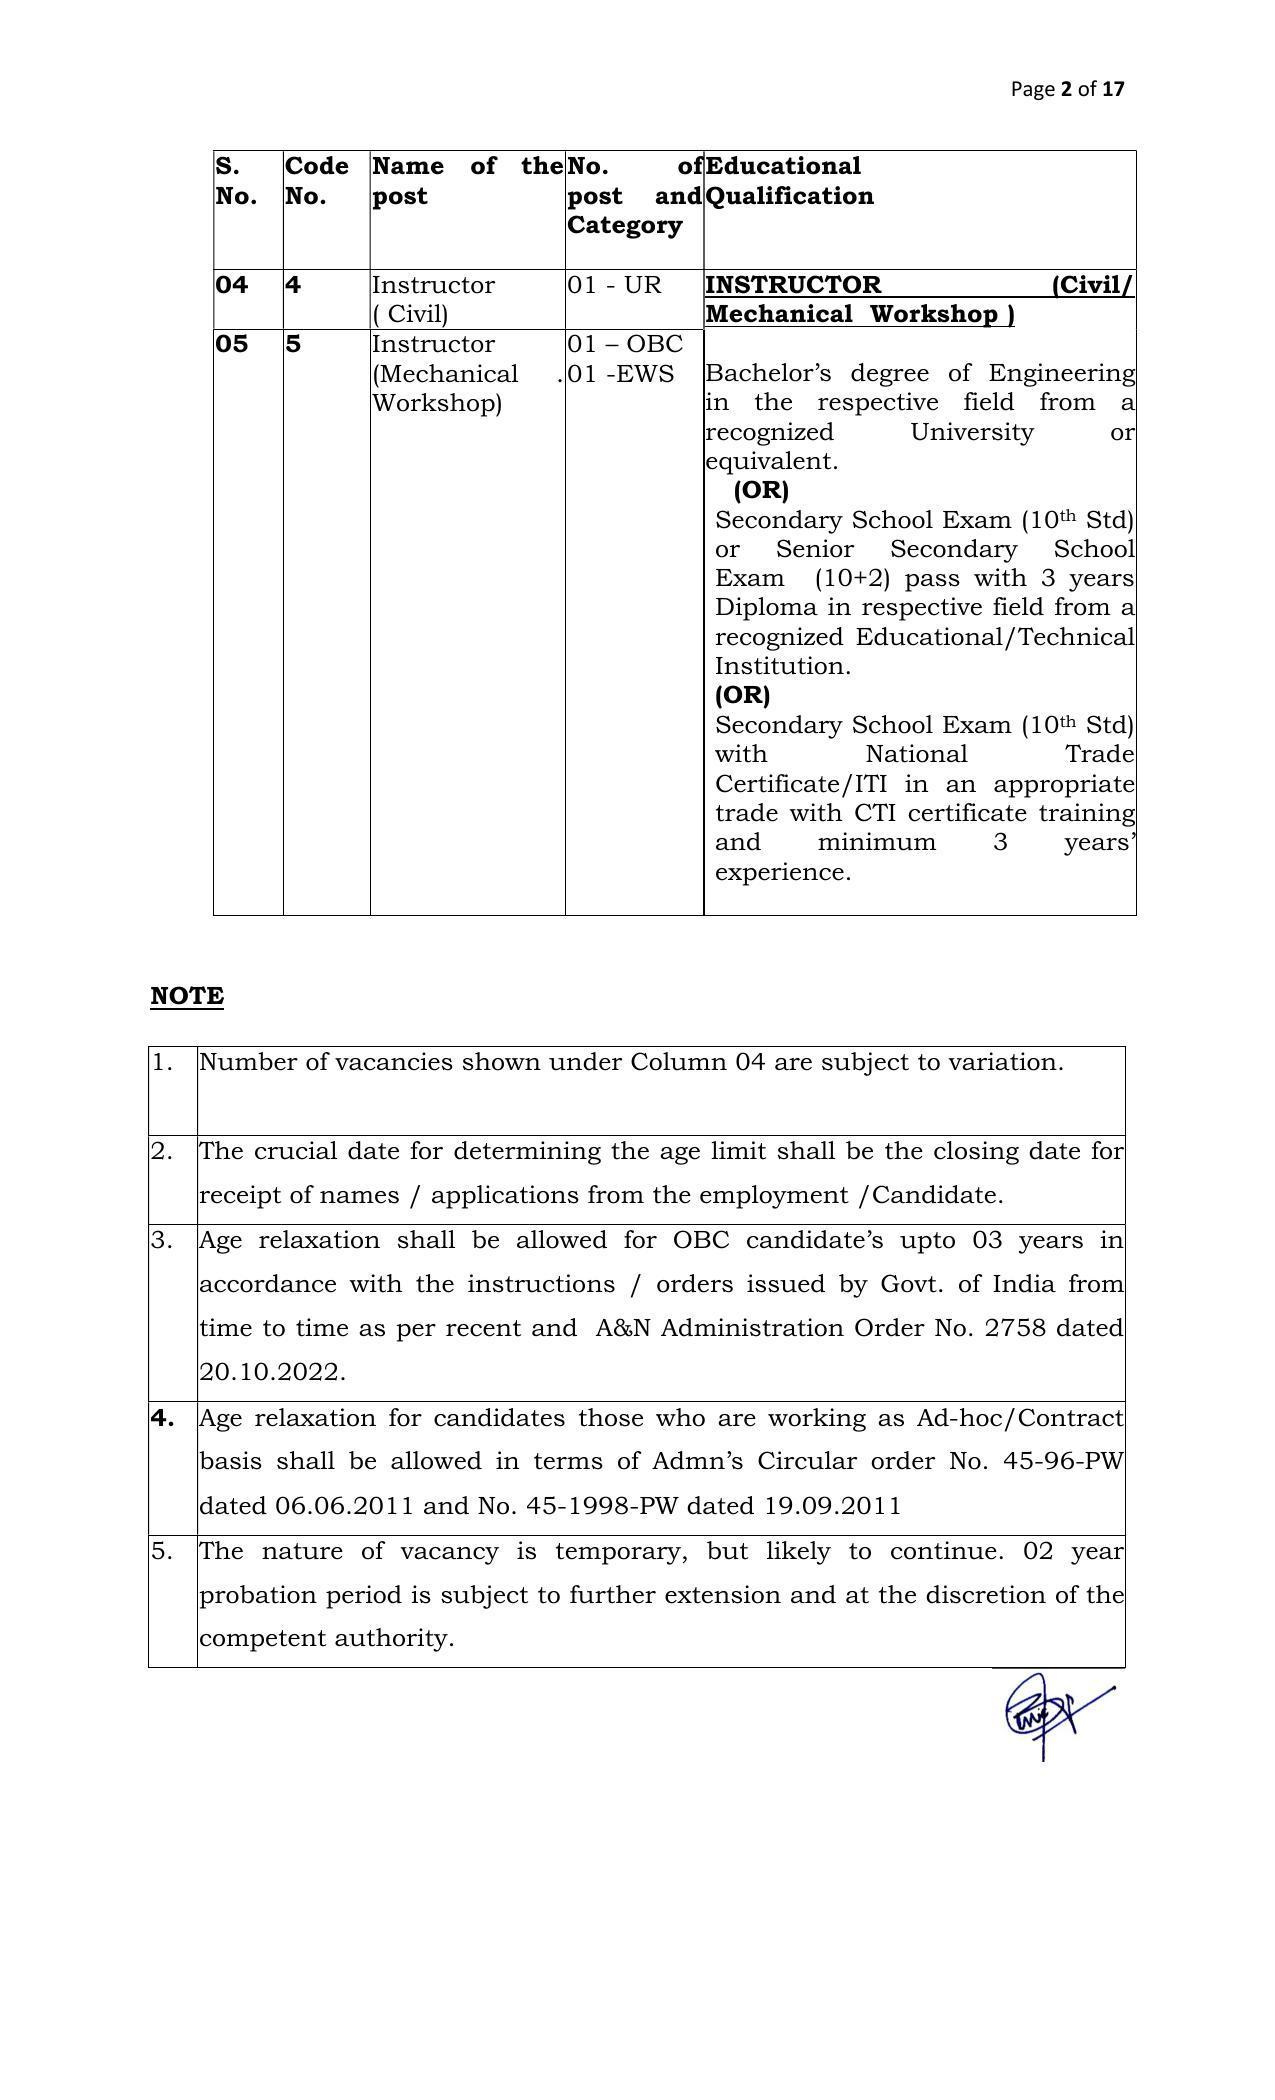 DBRAIT Invites Application for Lab Technician, Instructor Recruitment 2022 - Page 3